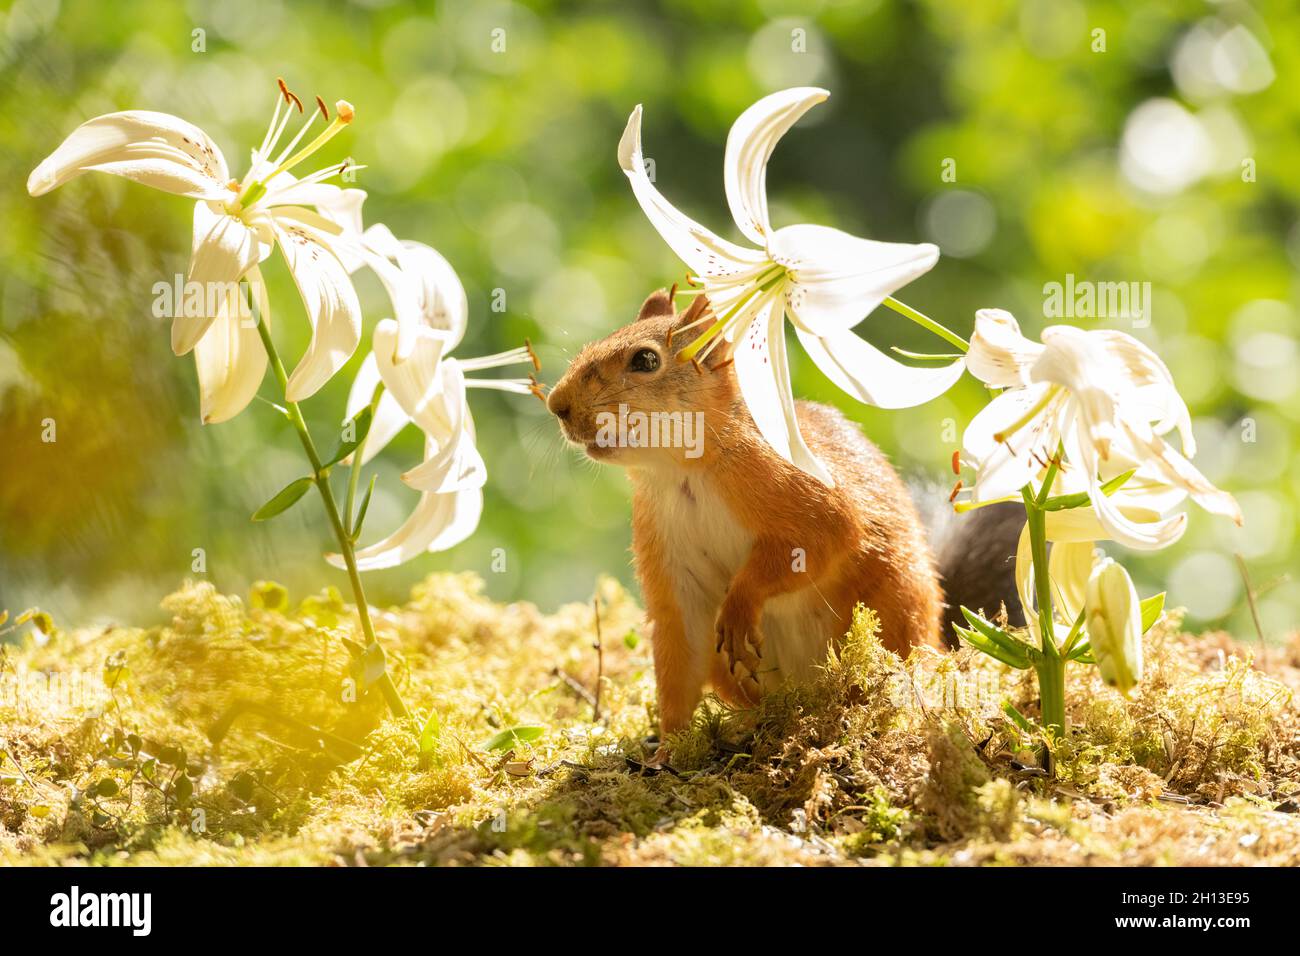 red squirrel is standing between white lilies Stock Photo